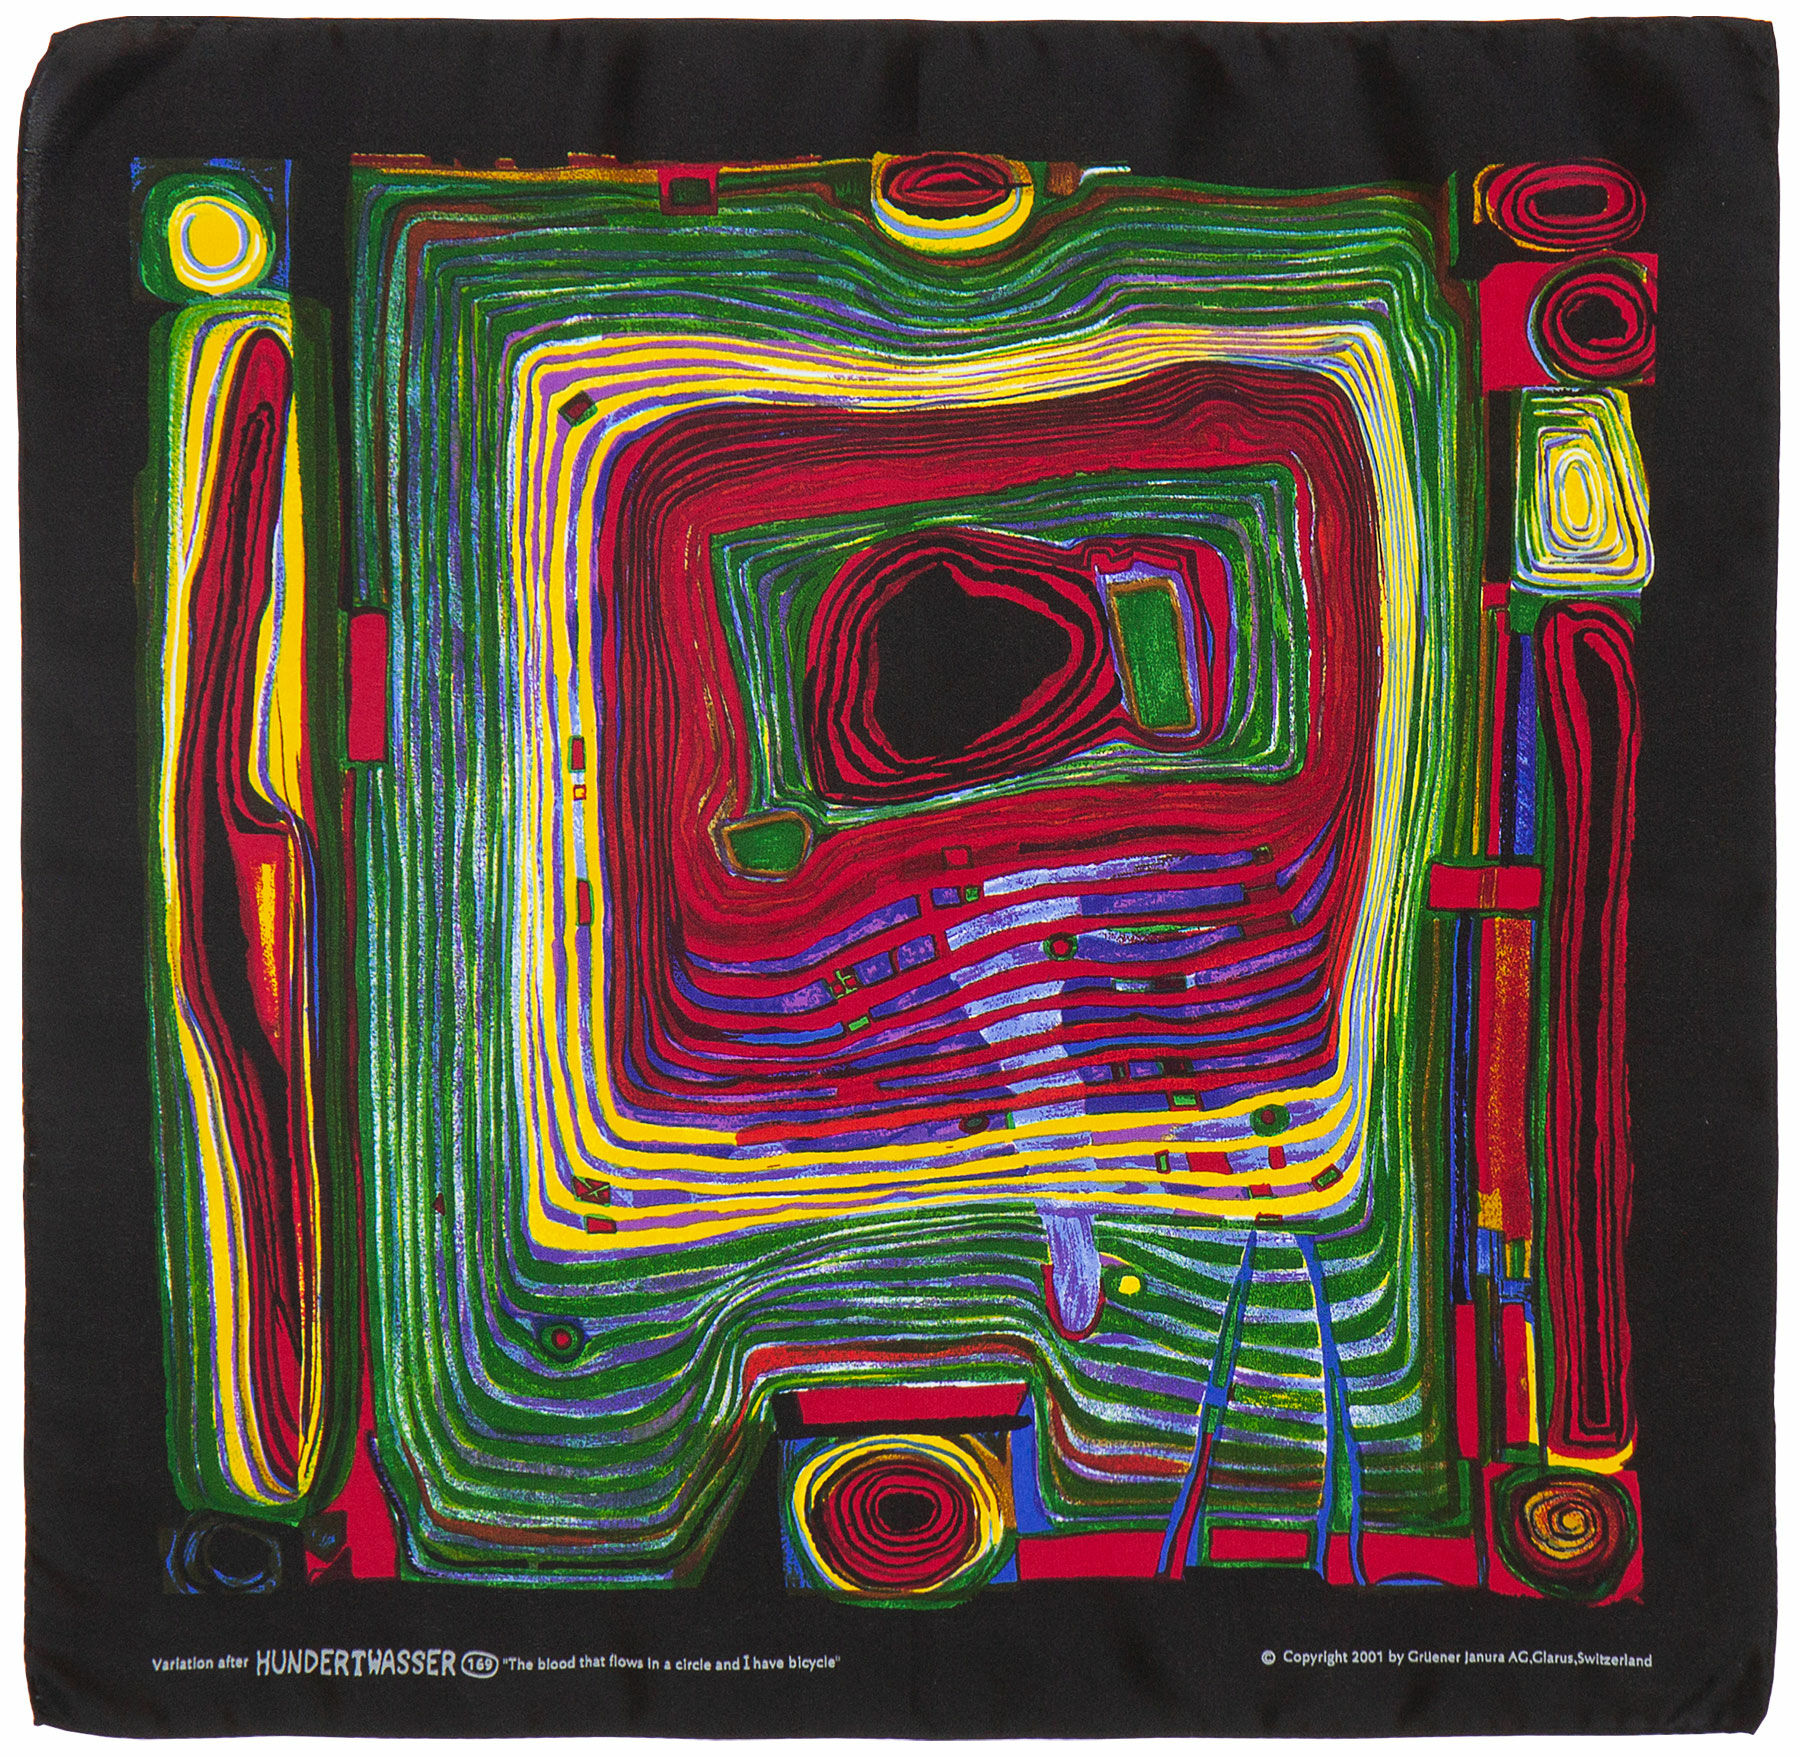 Silk handkerchief "The Blood That Flows in a Circle and I Have a Bicycle" (1975) by Friedensreich Hundertwasser